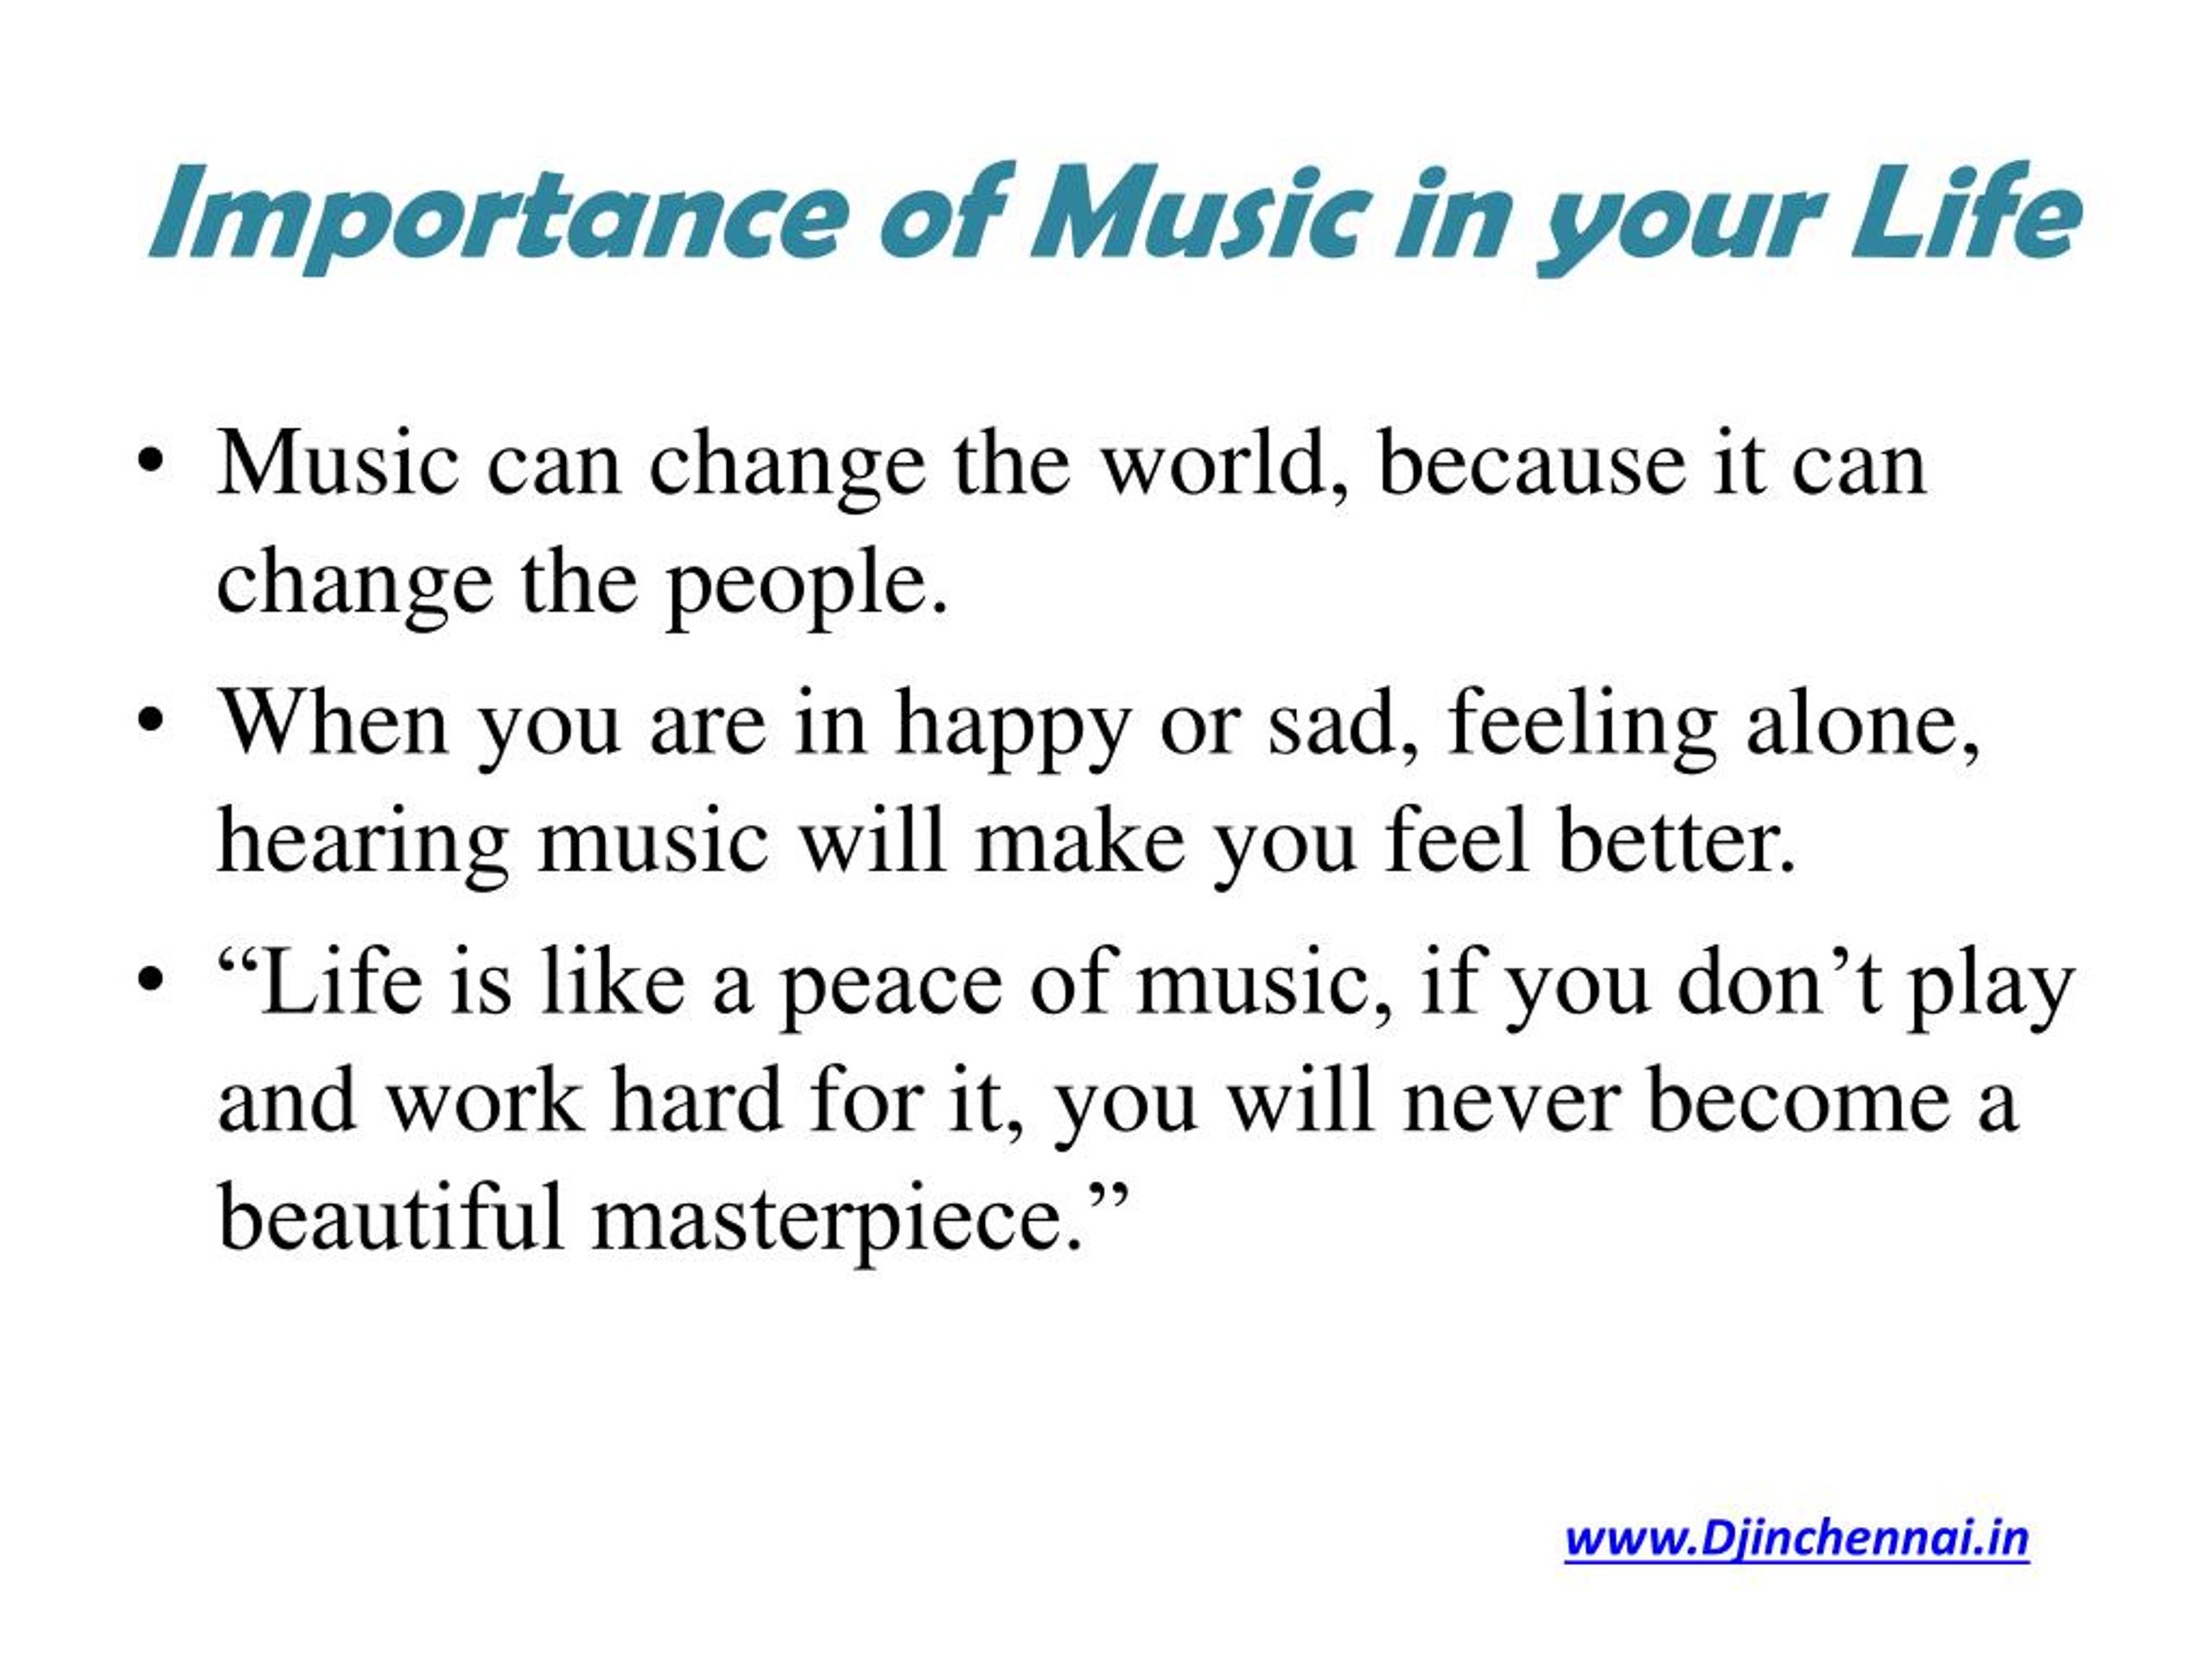 how does music impact our lives essay